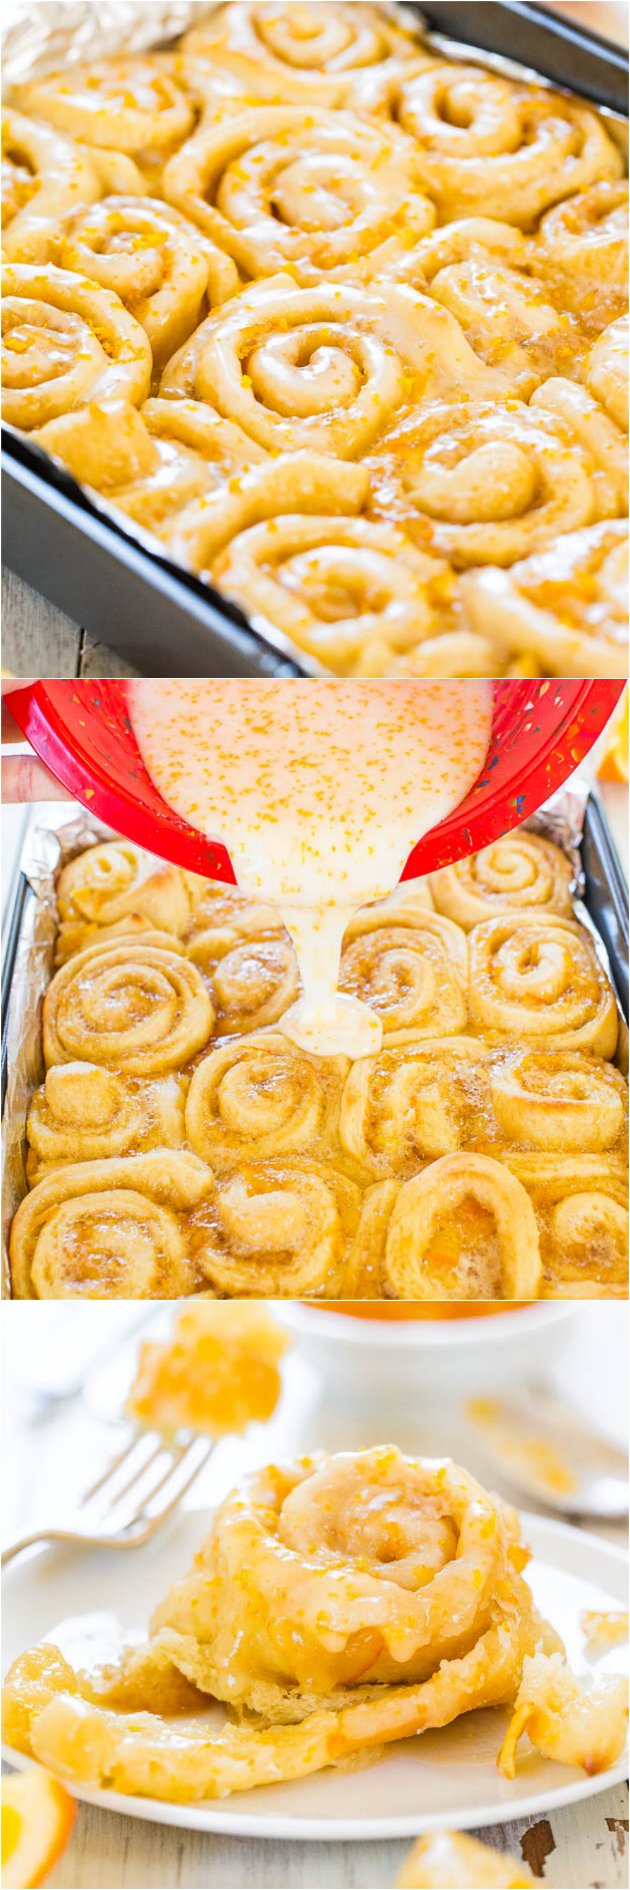 The Best Glazed Orange Sweet Rolls - The softest, lightest, and most irresistible rolls ever! Try them and you'll be a believer, too!